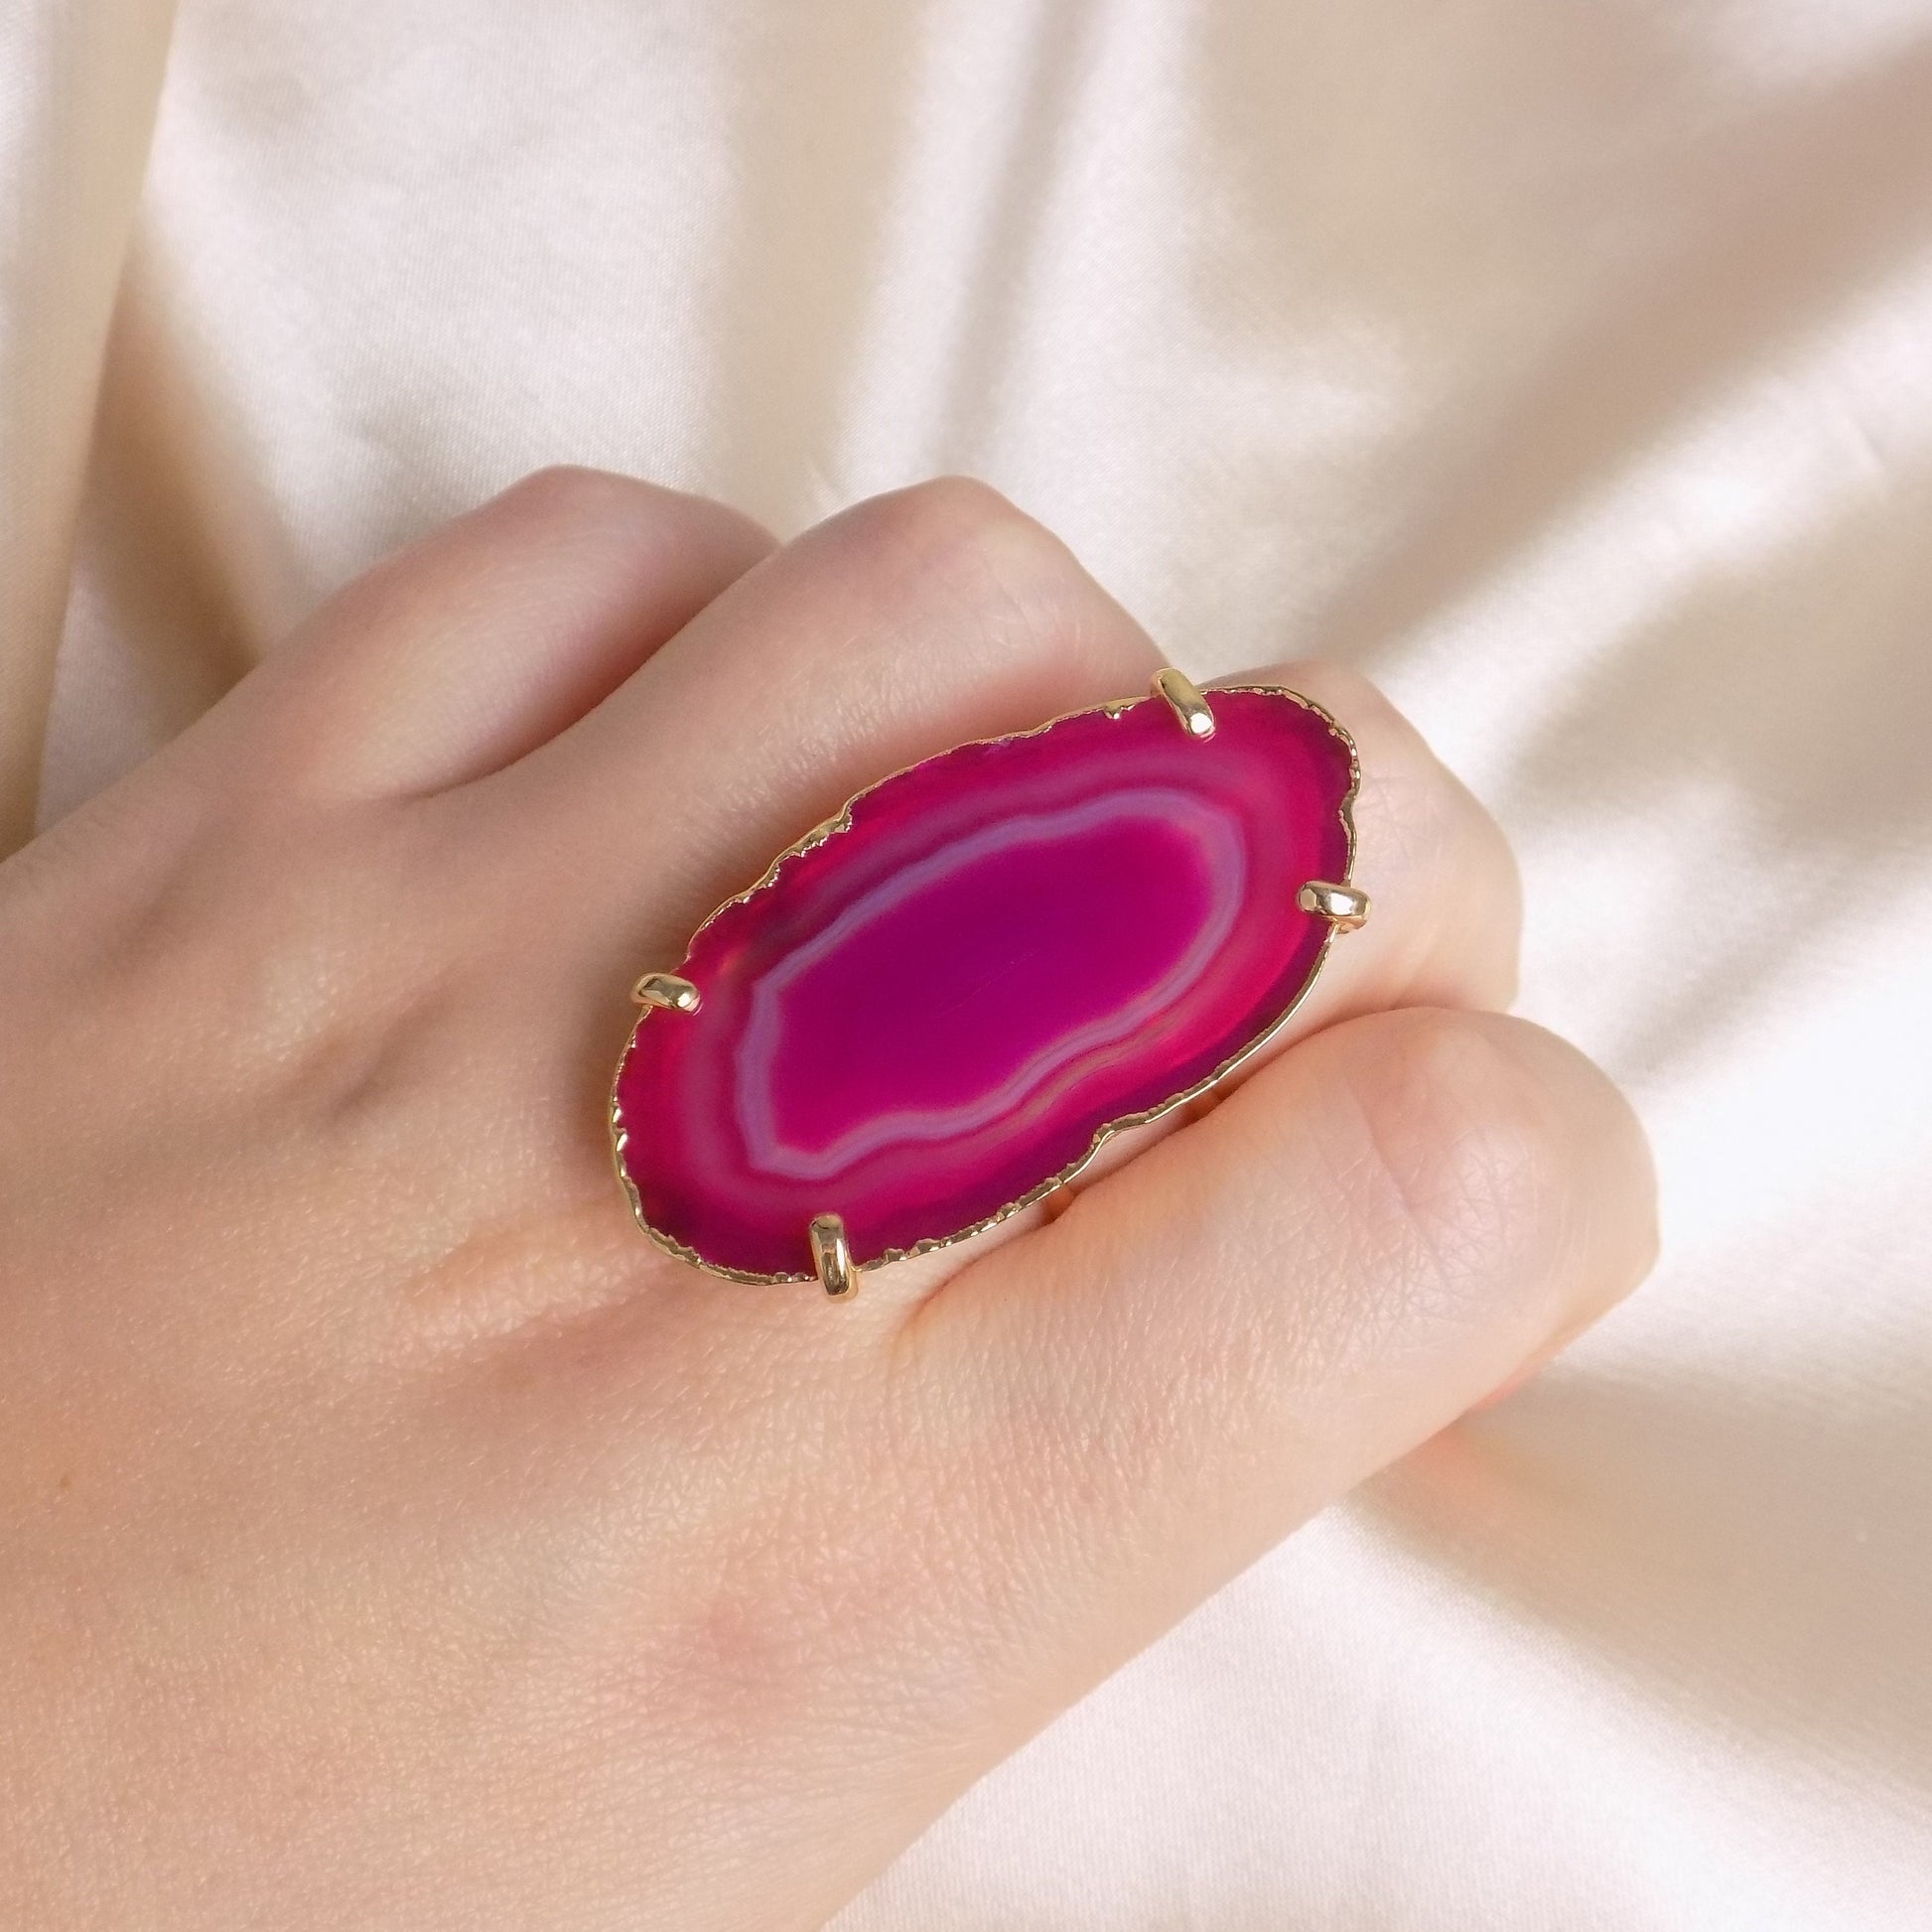 Unique Pink Agate Ring Gold Plated Adjustable - Boho Statement Jewelry